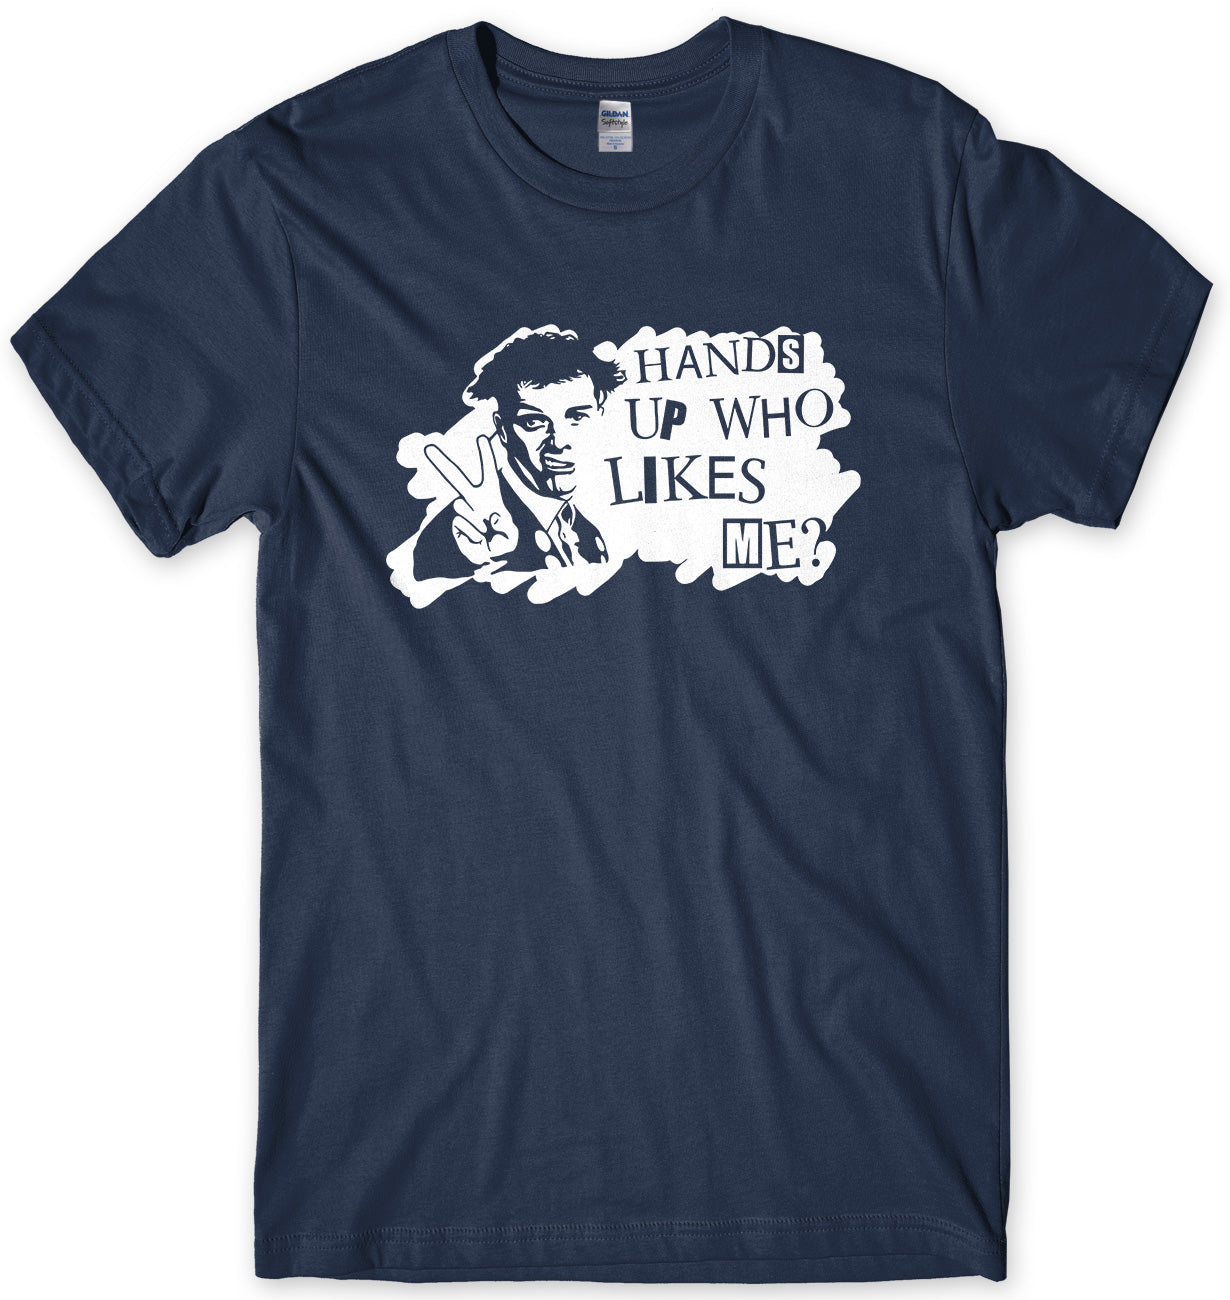 HAND UP WHO LIKES ME? - INSPIRED BY THE YOUNG ONES MENS UNISEX T-SHIRT